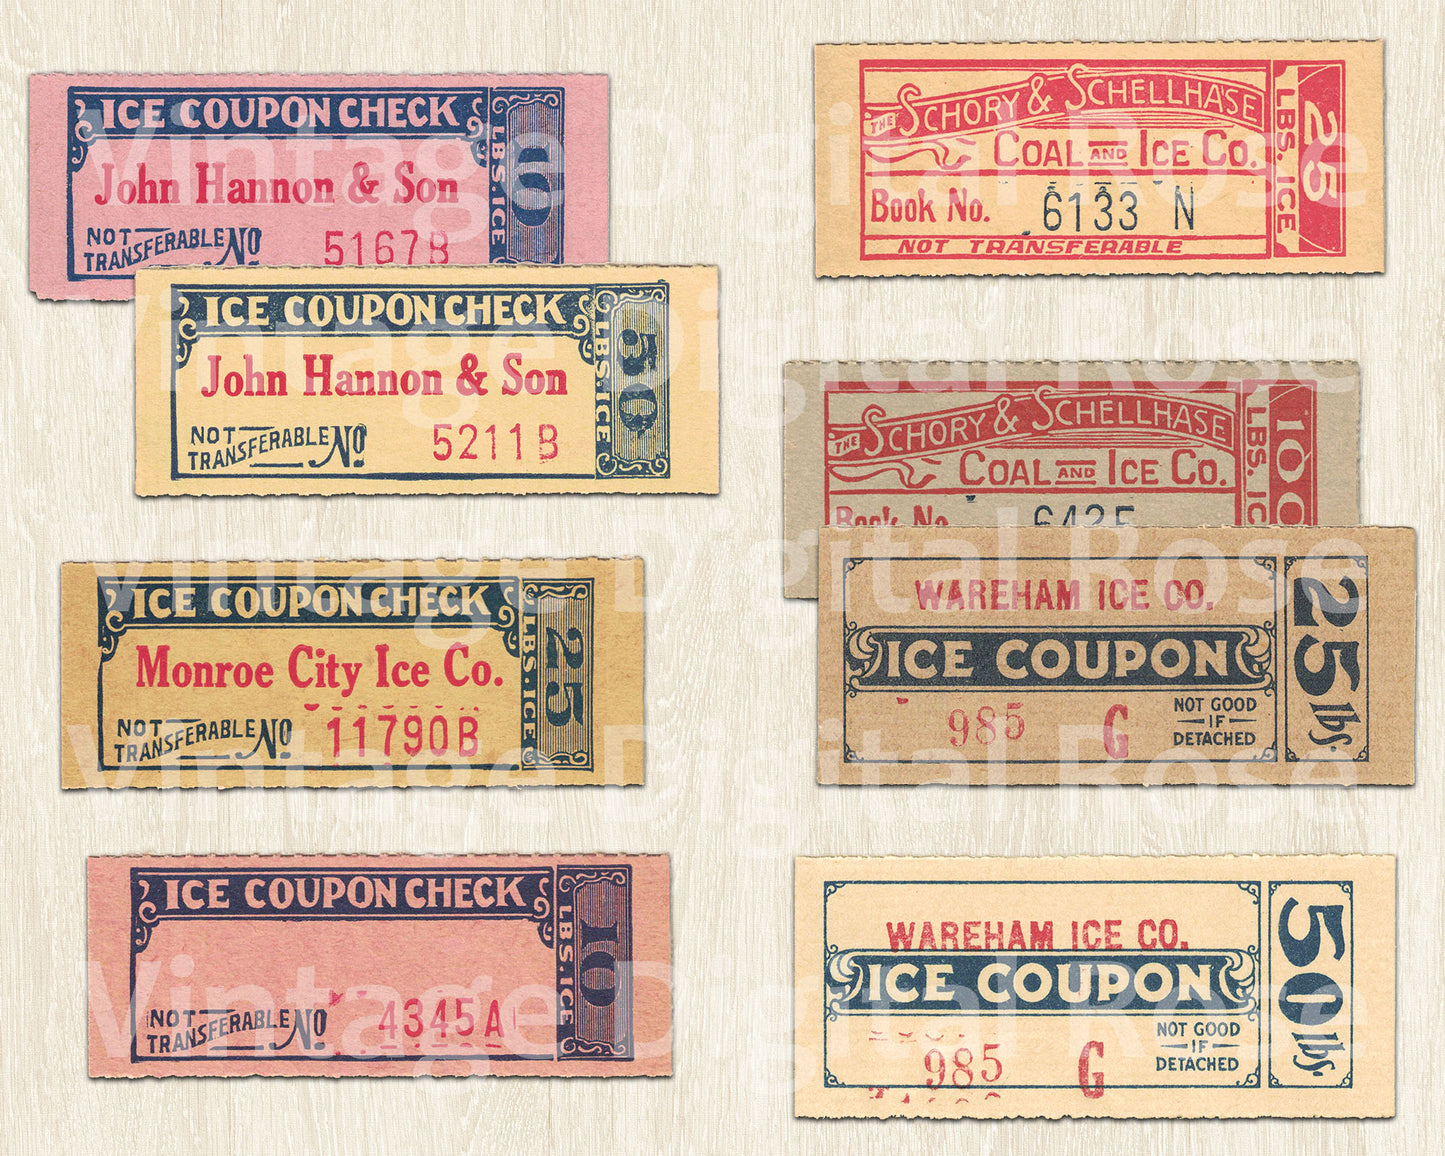 Vintage Printable Ice Coupon Checks Assorted Colors Digital Collage Sheet JPG PNG Format Set of 8 Eight Tickets Vintage Ephemera